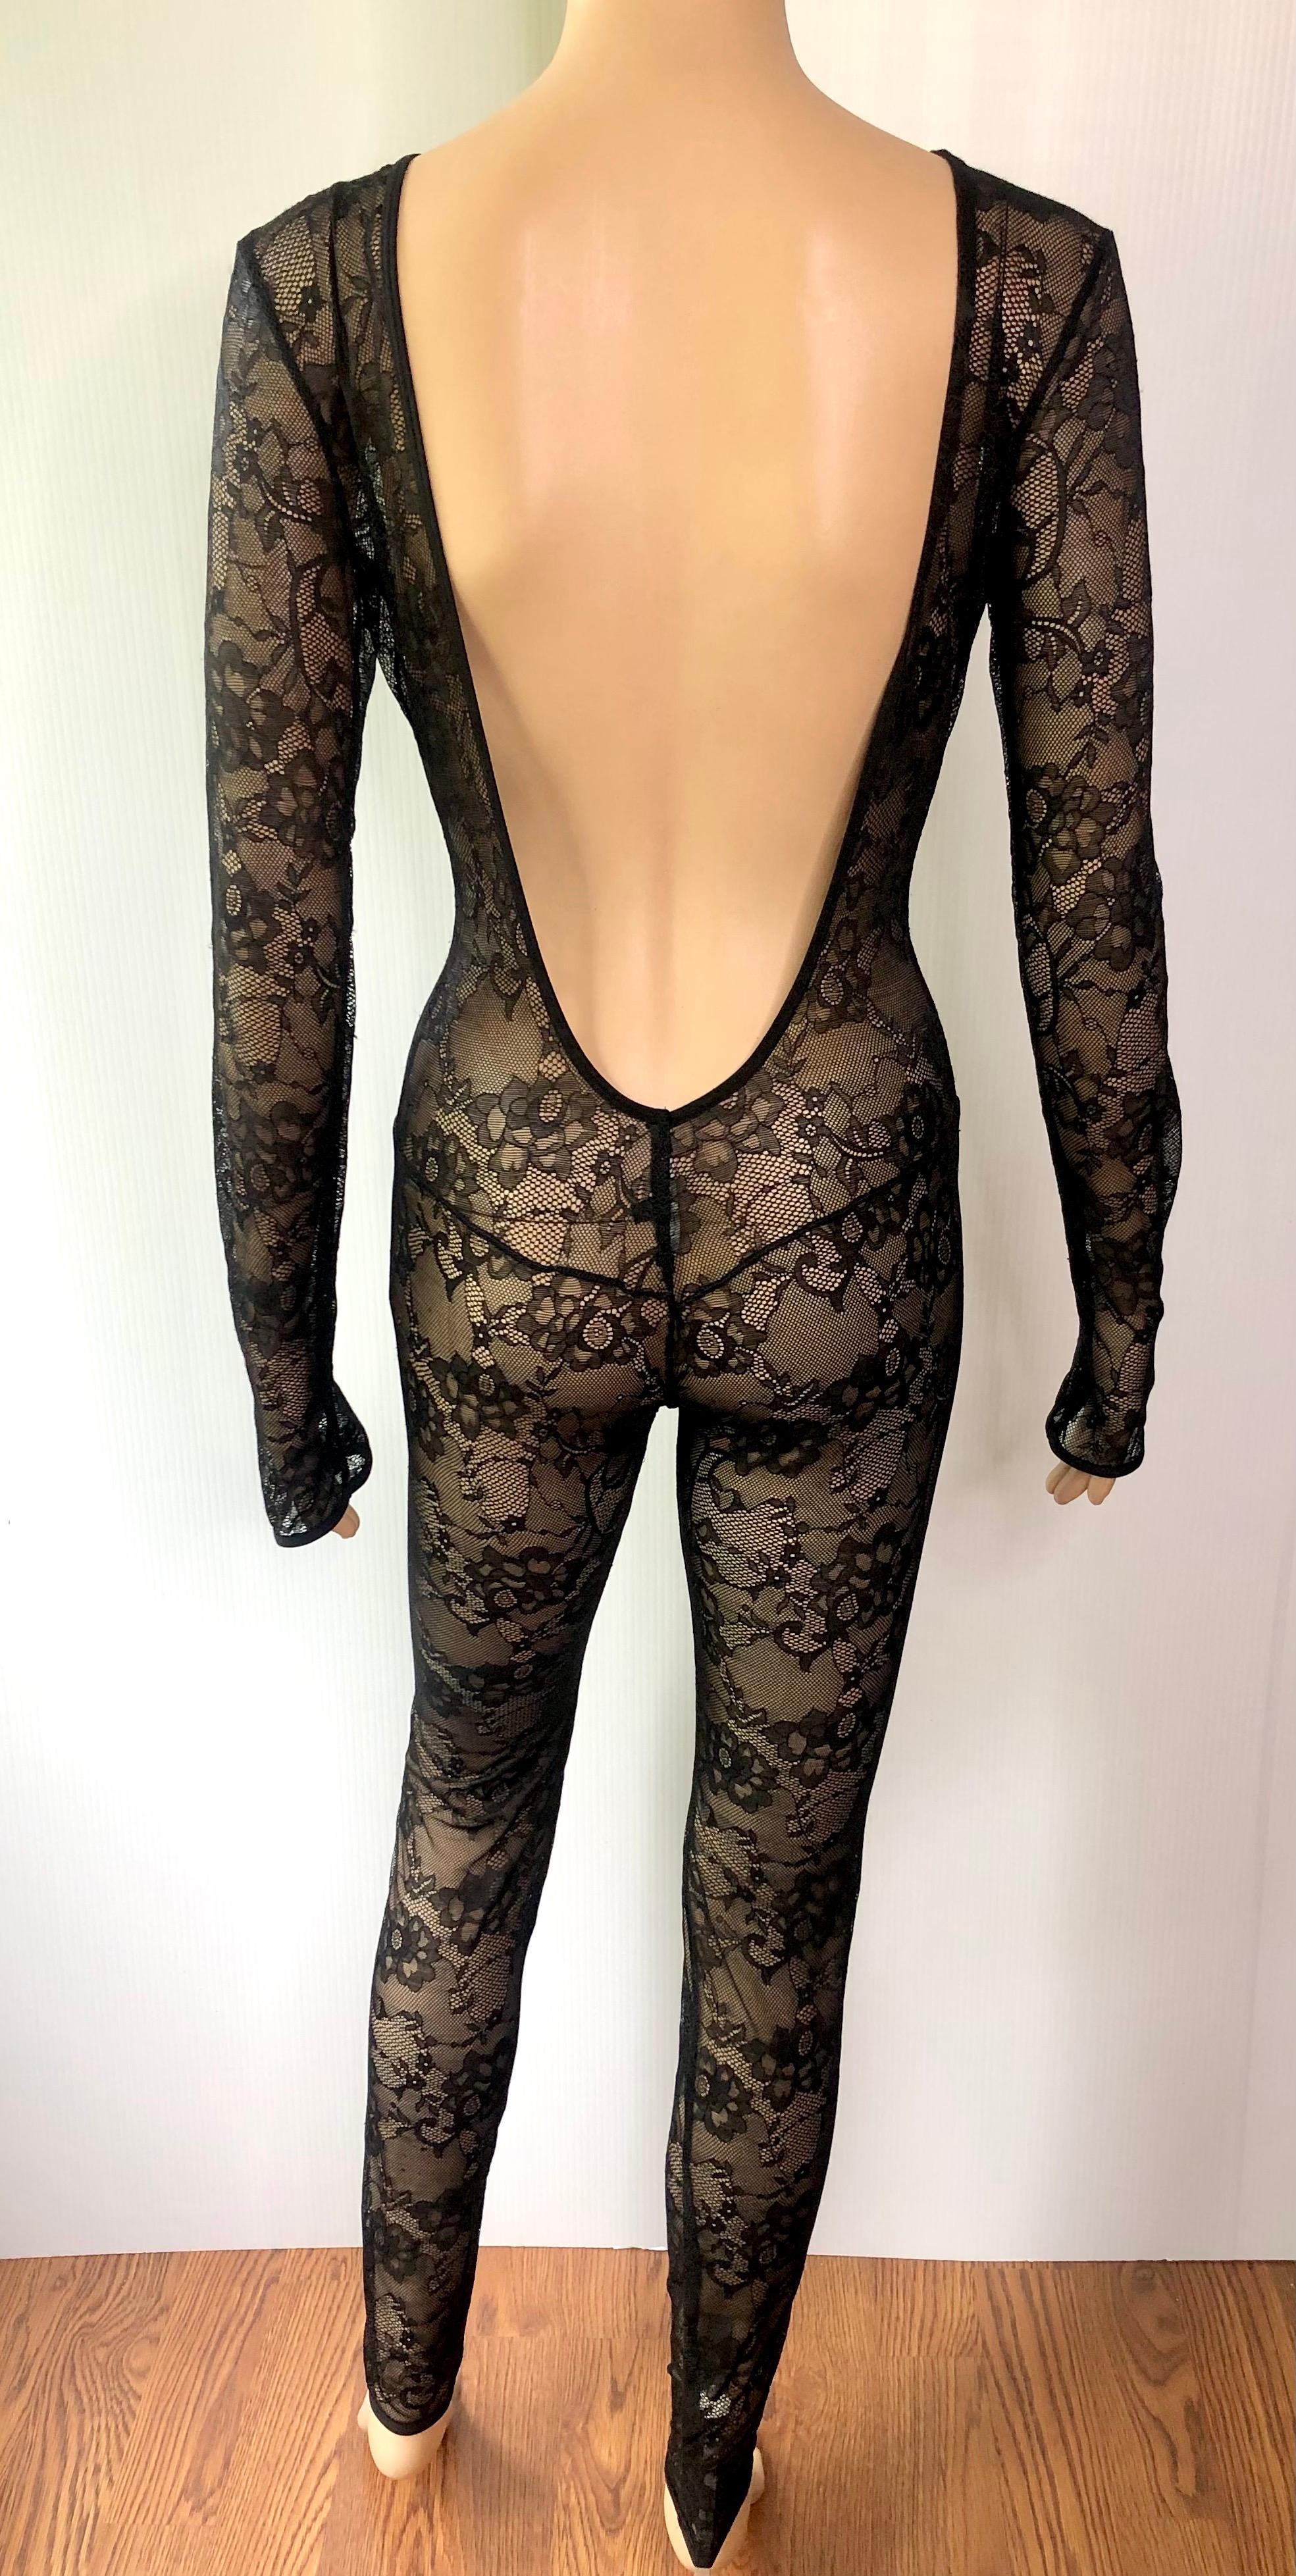 Gucci Plunging Neckline Open Back Sheer Lace Bodycon Black Playsuit Jumpsuit 3